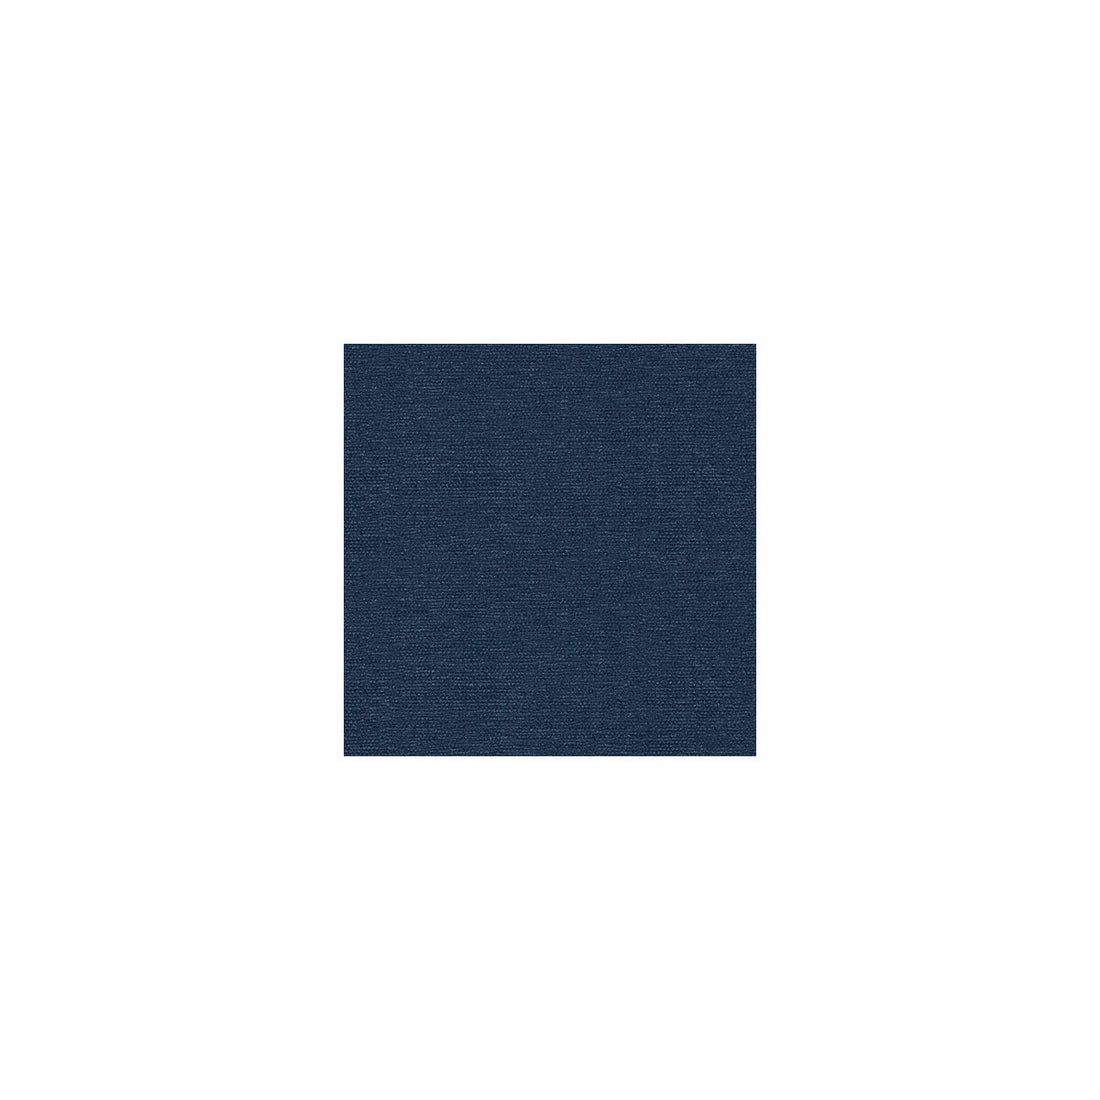 Stanton Chenille fabric in jeans color - pattern 32148.5.0 - by Kravet Contract